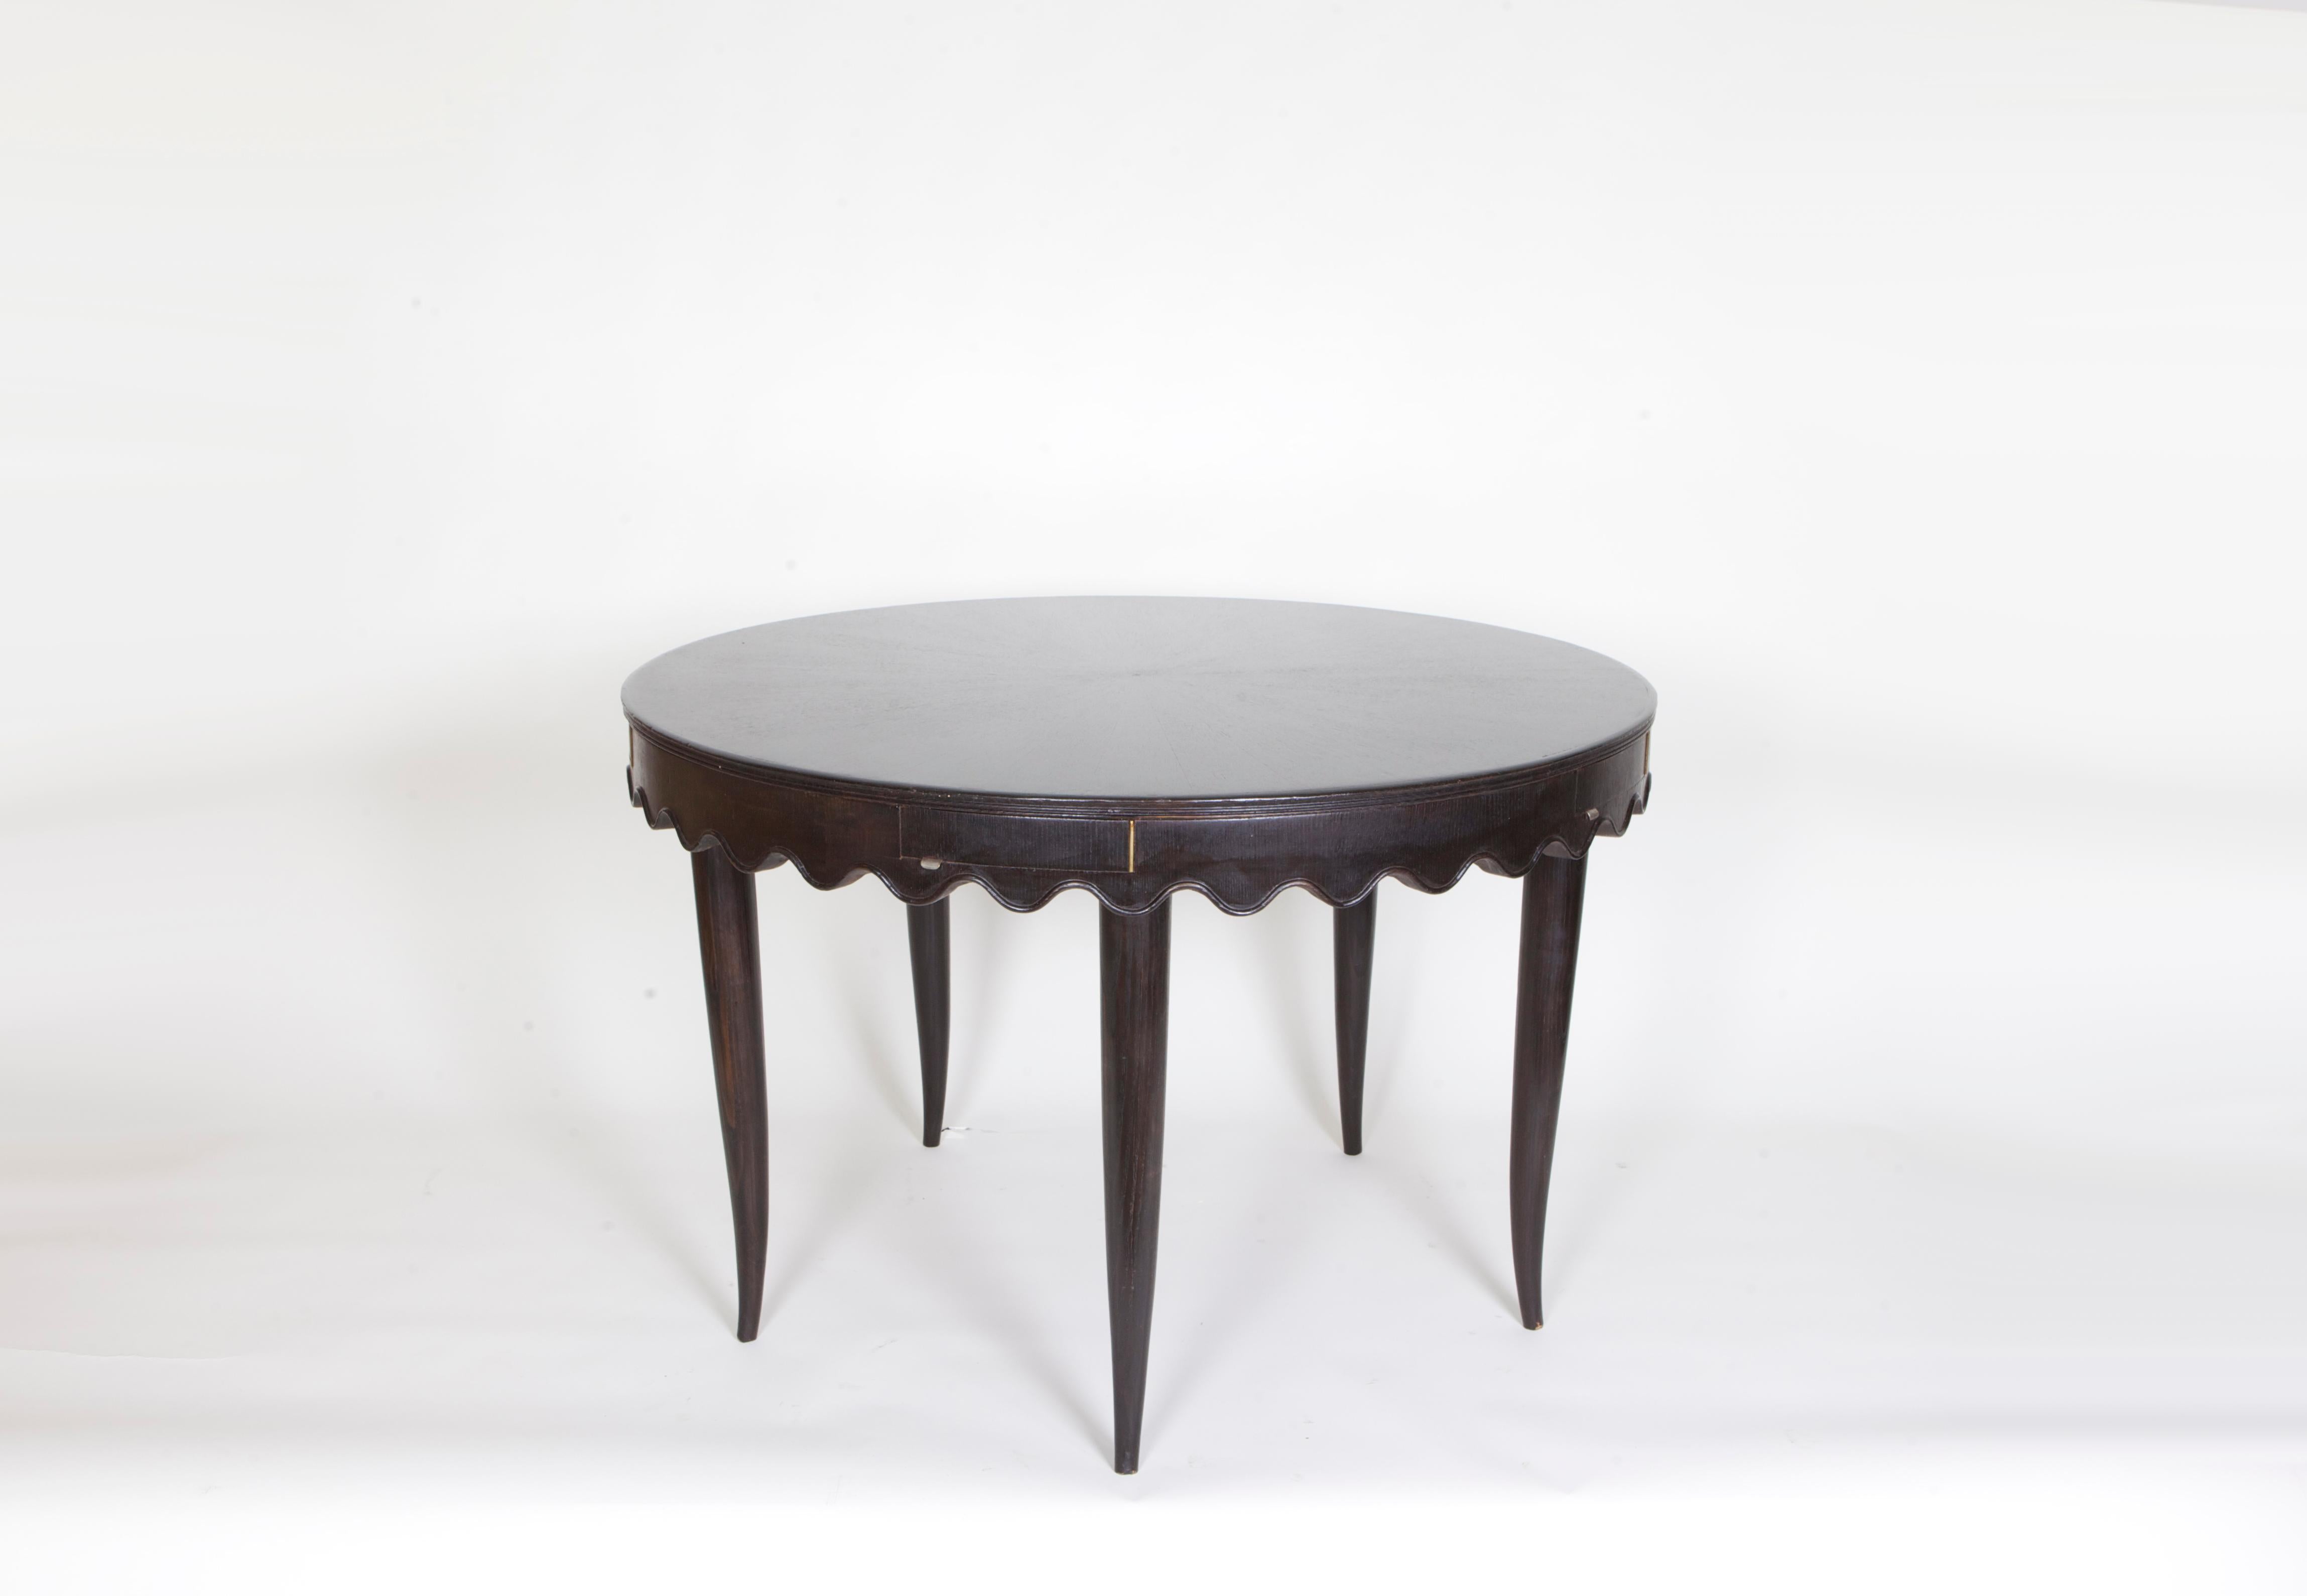 Round game table by Paolo Buffa, circa 1955, in stained wood. Beautiful table in great condition with scalloped edges and four drawers.

Paolo Buffa was an Italian architect and designer best known for his designs of mid-Century Furniture.